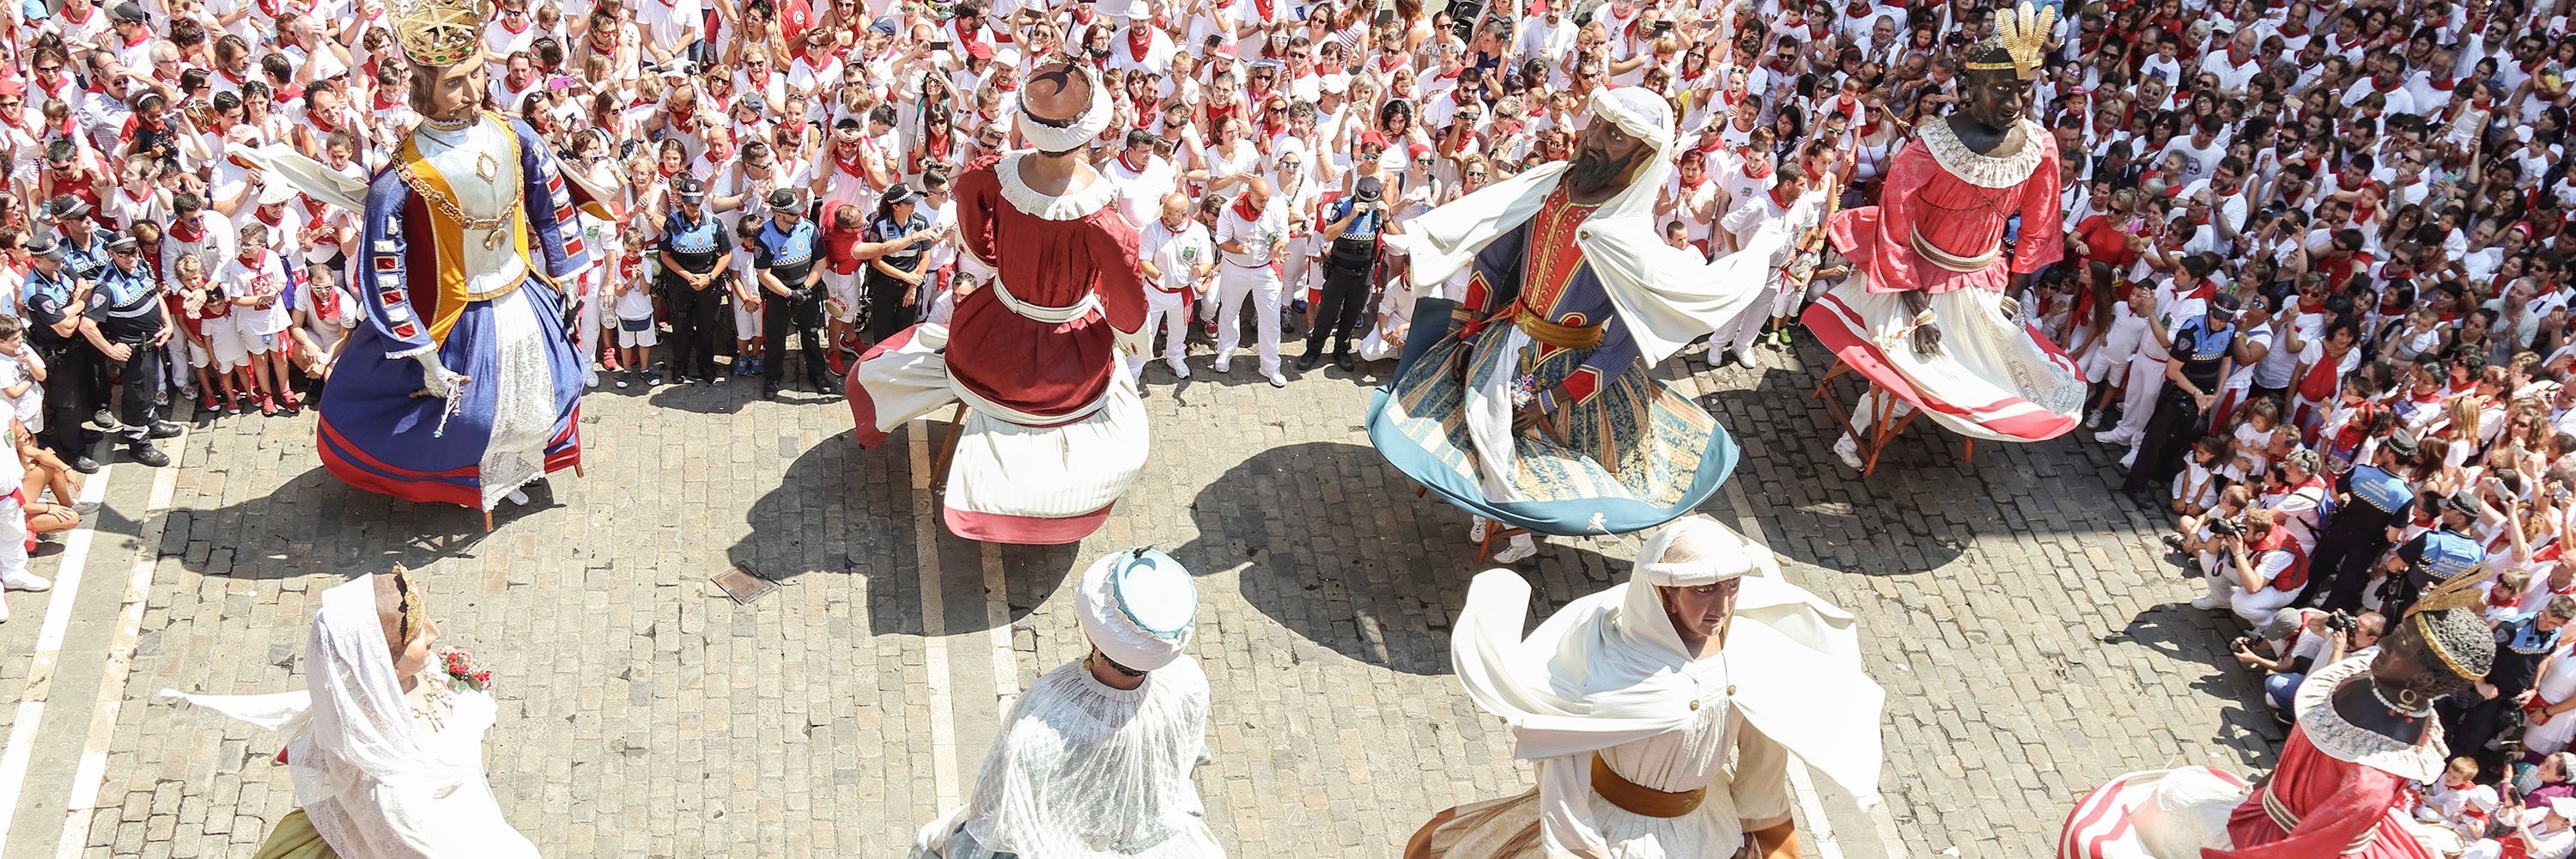 Final dance at the city hall in San Fermin, Pamplona, Spain